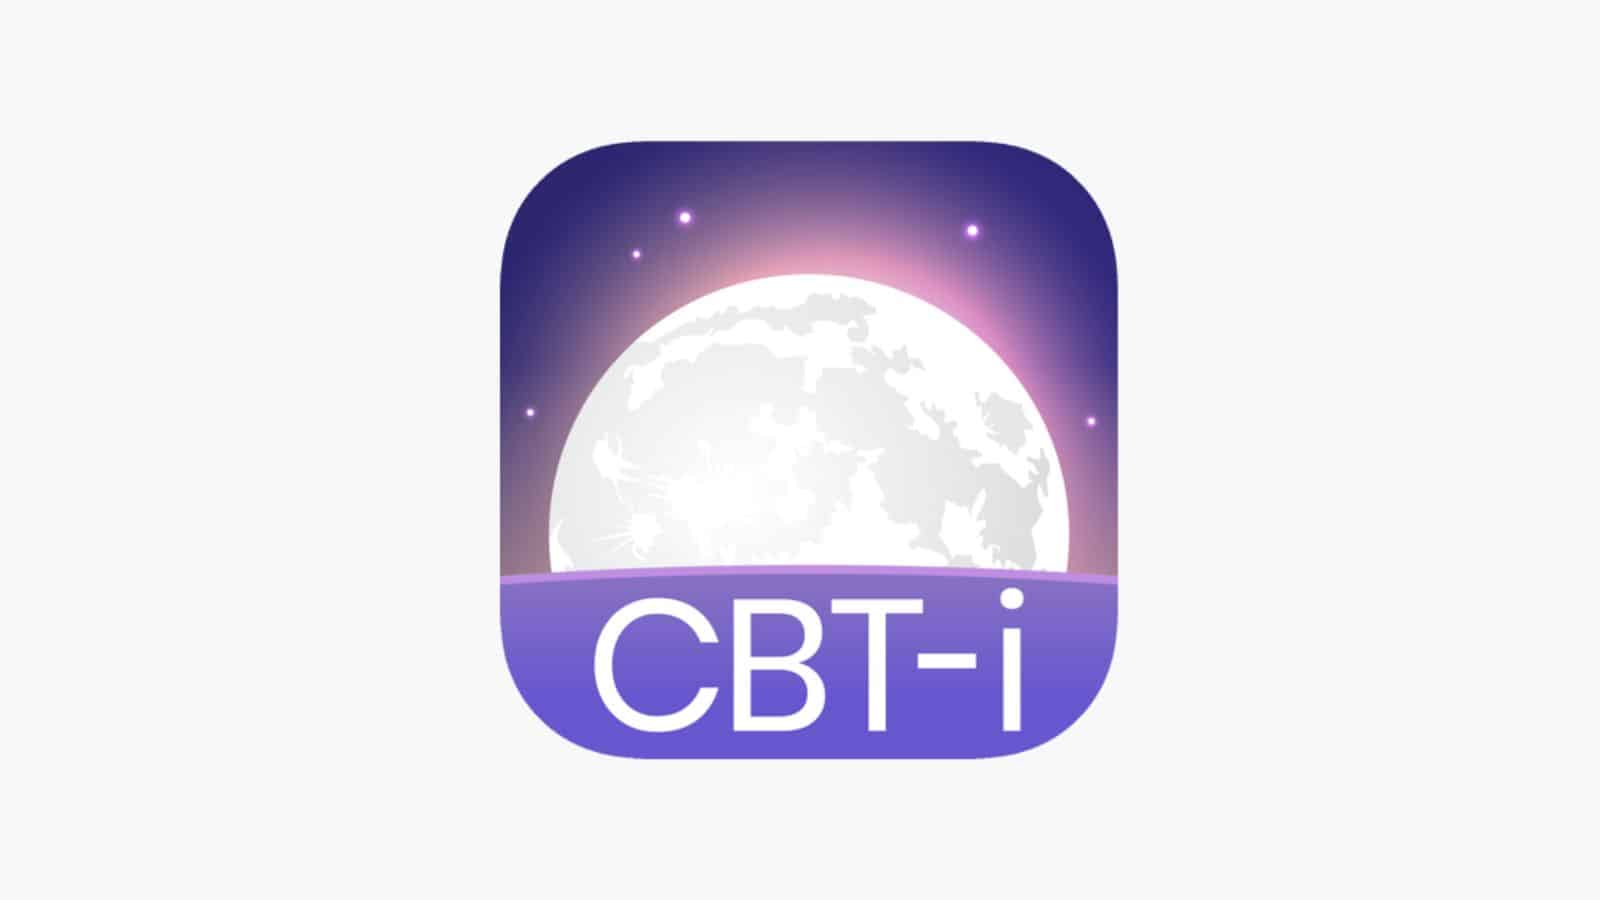 <p><a href="https://mobile.va.gov/app/cbt-i-coach" rel="noopener external noreferrer">CBT-i Coach</a> was a collaborative effort between the VA’s National Center for PTSD, Stanford School of Medicine, and DoD’s National Center for Telehealth and Technology. CBT-i Coach is for people engaged in Cognitive Behavioral Therapy for Insomnia with a health provider.</p> <p>The app is designed to teach users about sleep, develop positive sleeping habits, and improve the atmosphere in which they sleep. A sleep therapy coach in your pocket provides strategies to improve sleep habits and achieve a healthier sleep cycle.</p>